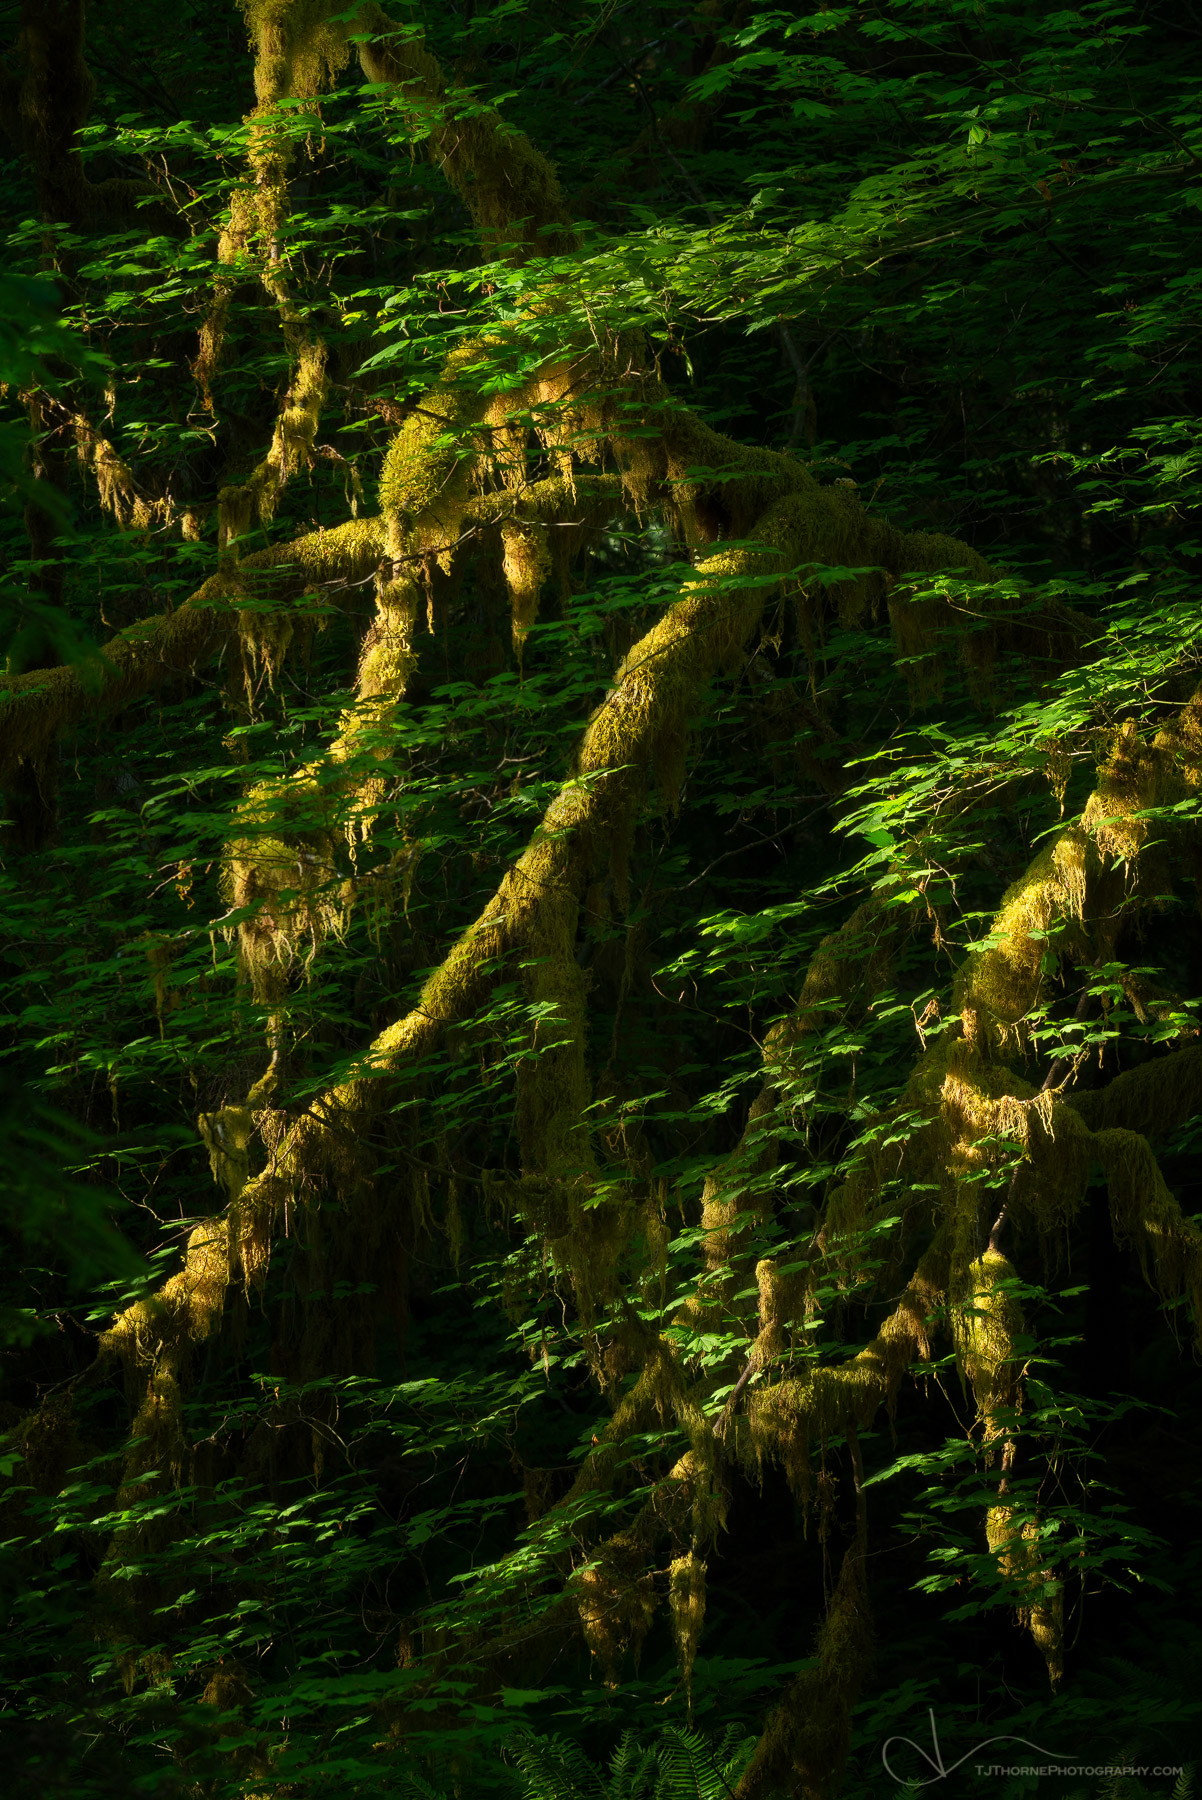 Evening light on a mossy vine maple in Olympic National Park.